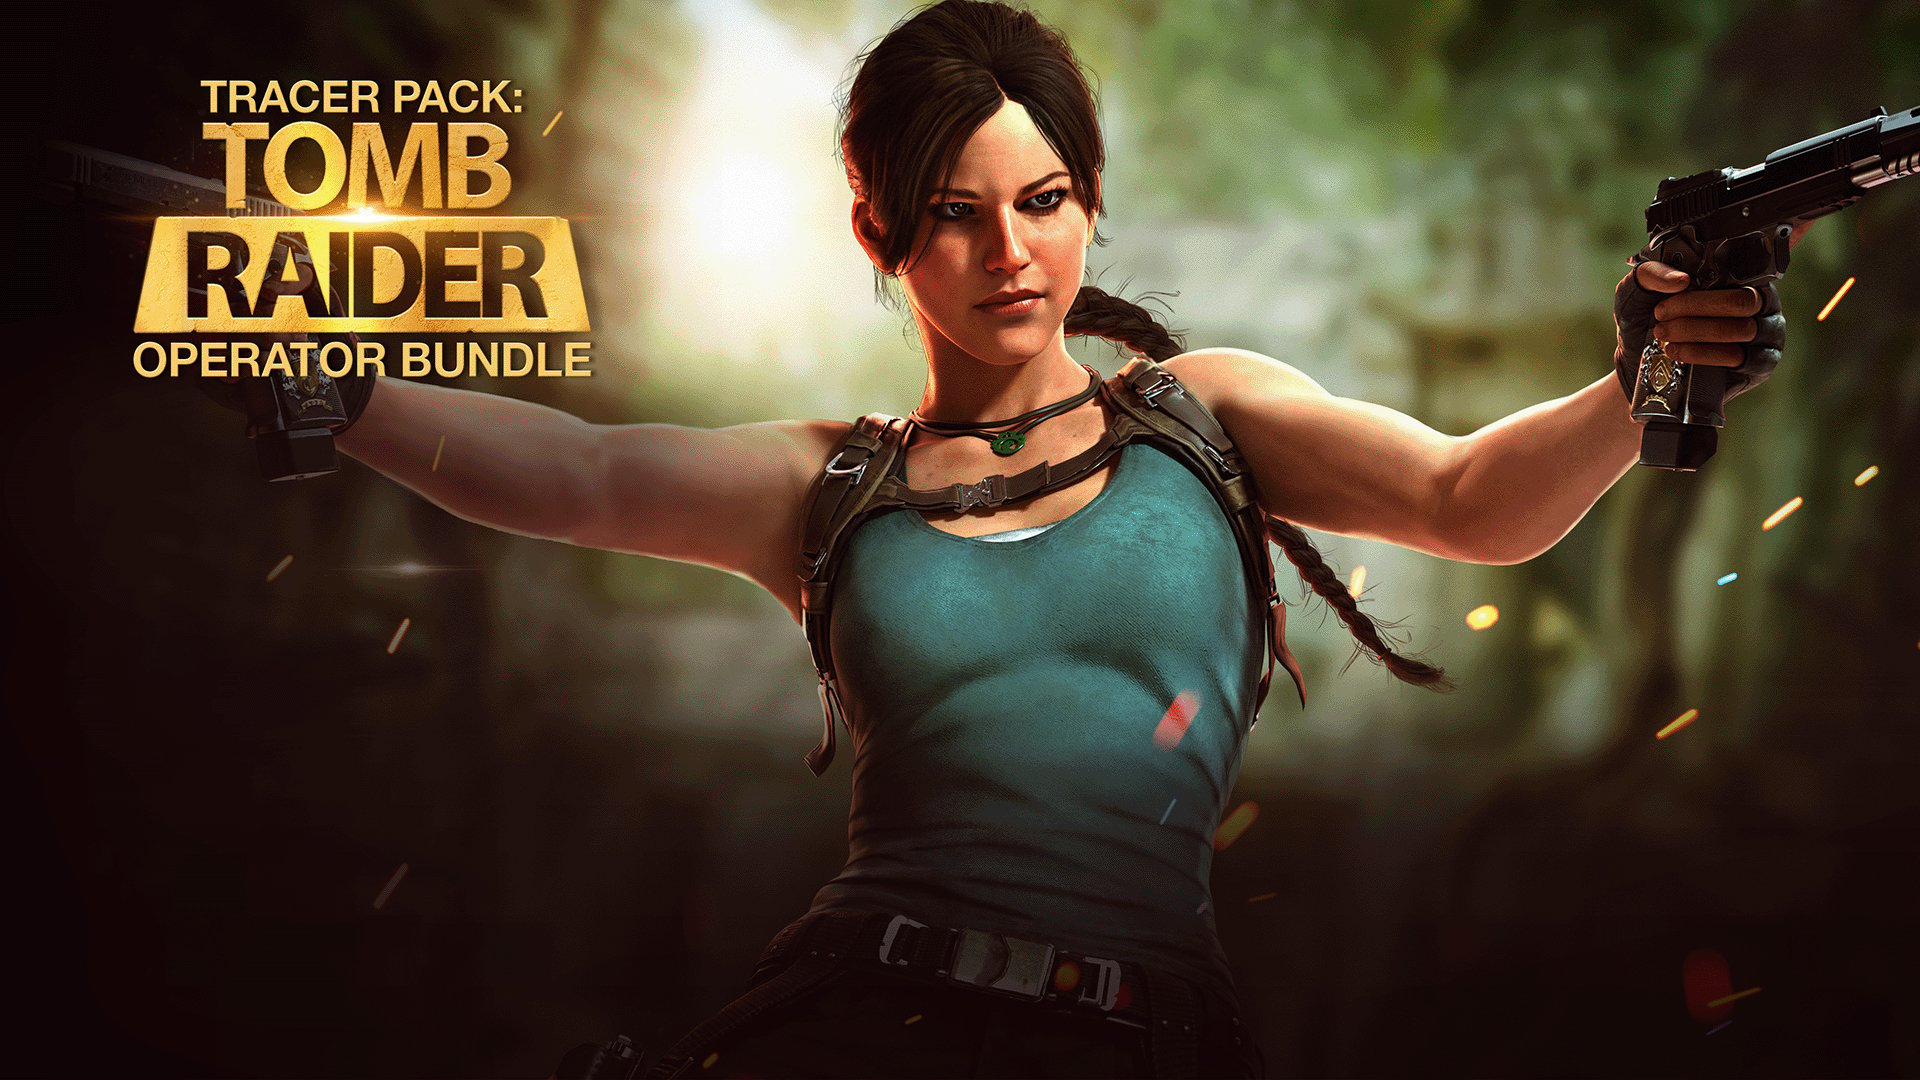 Lara Croft is coming to Call of Duty as an Operator in September VGC